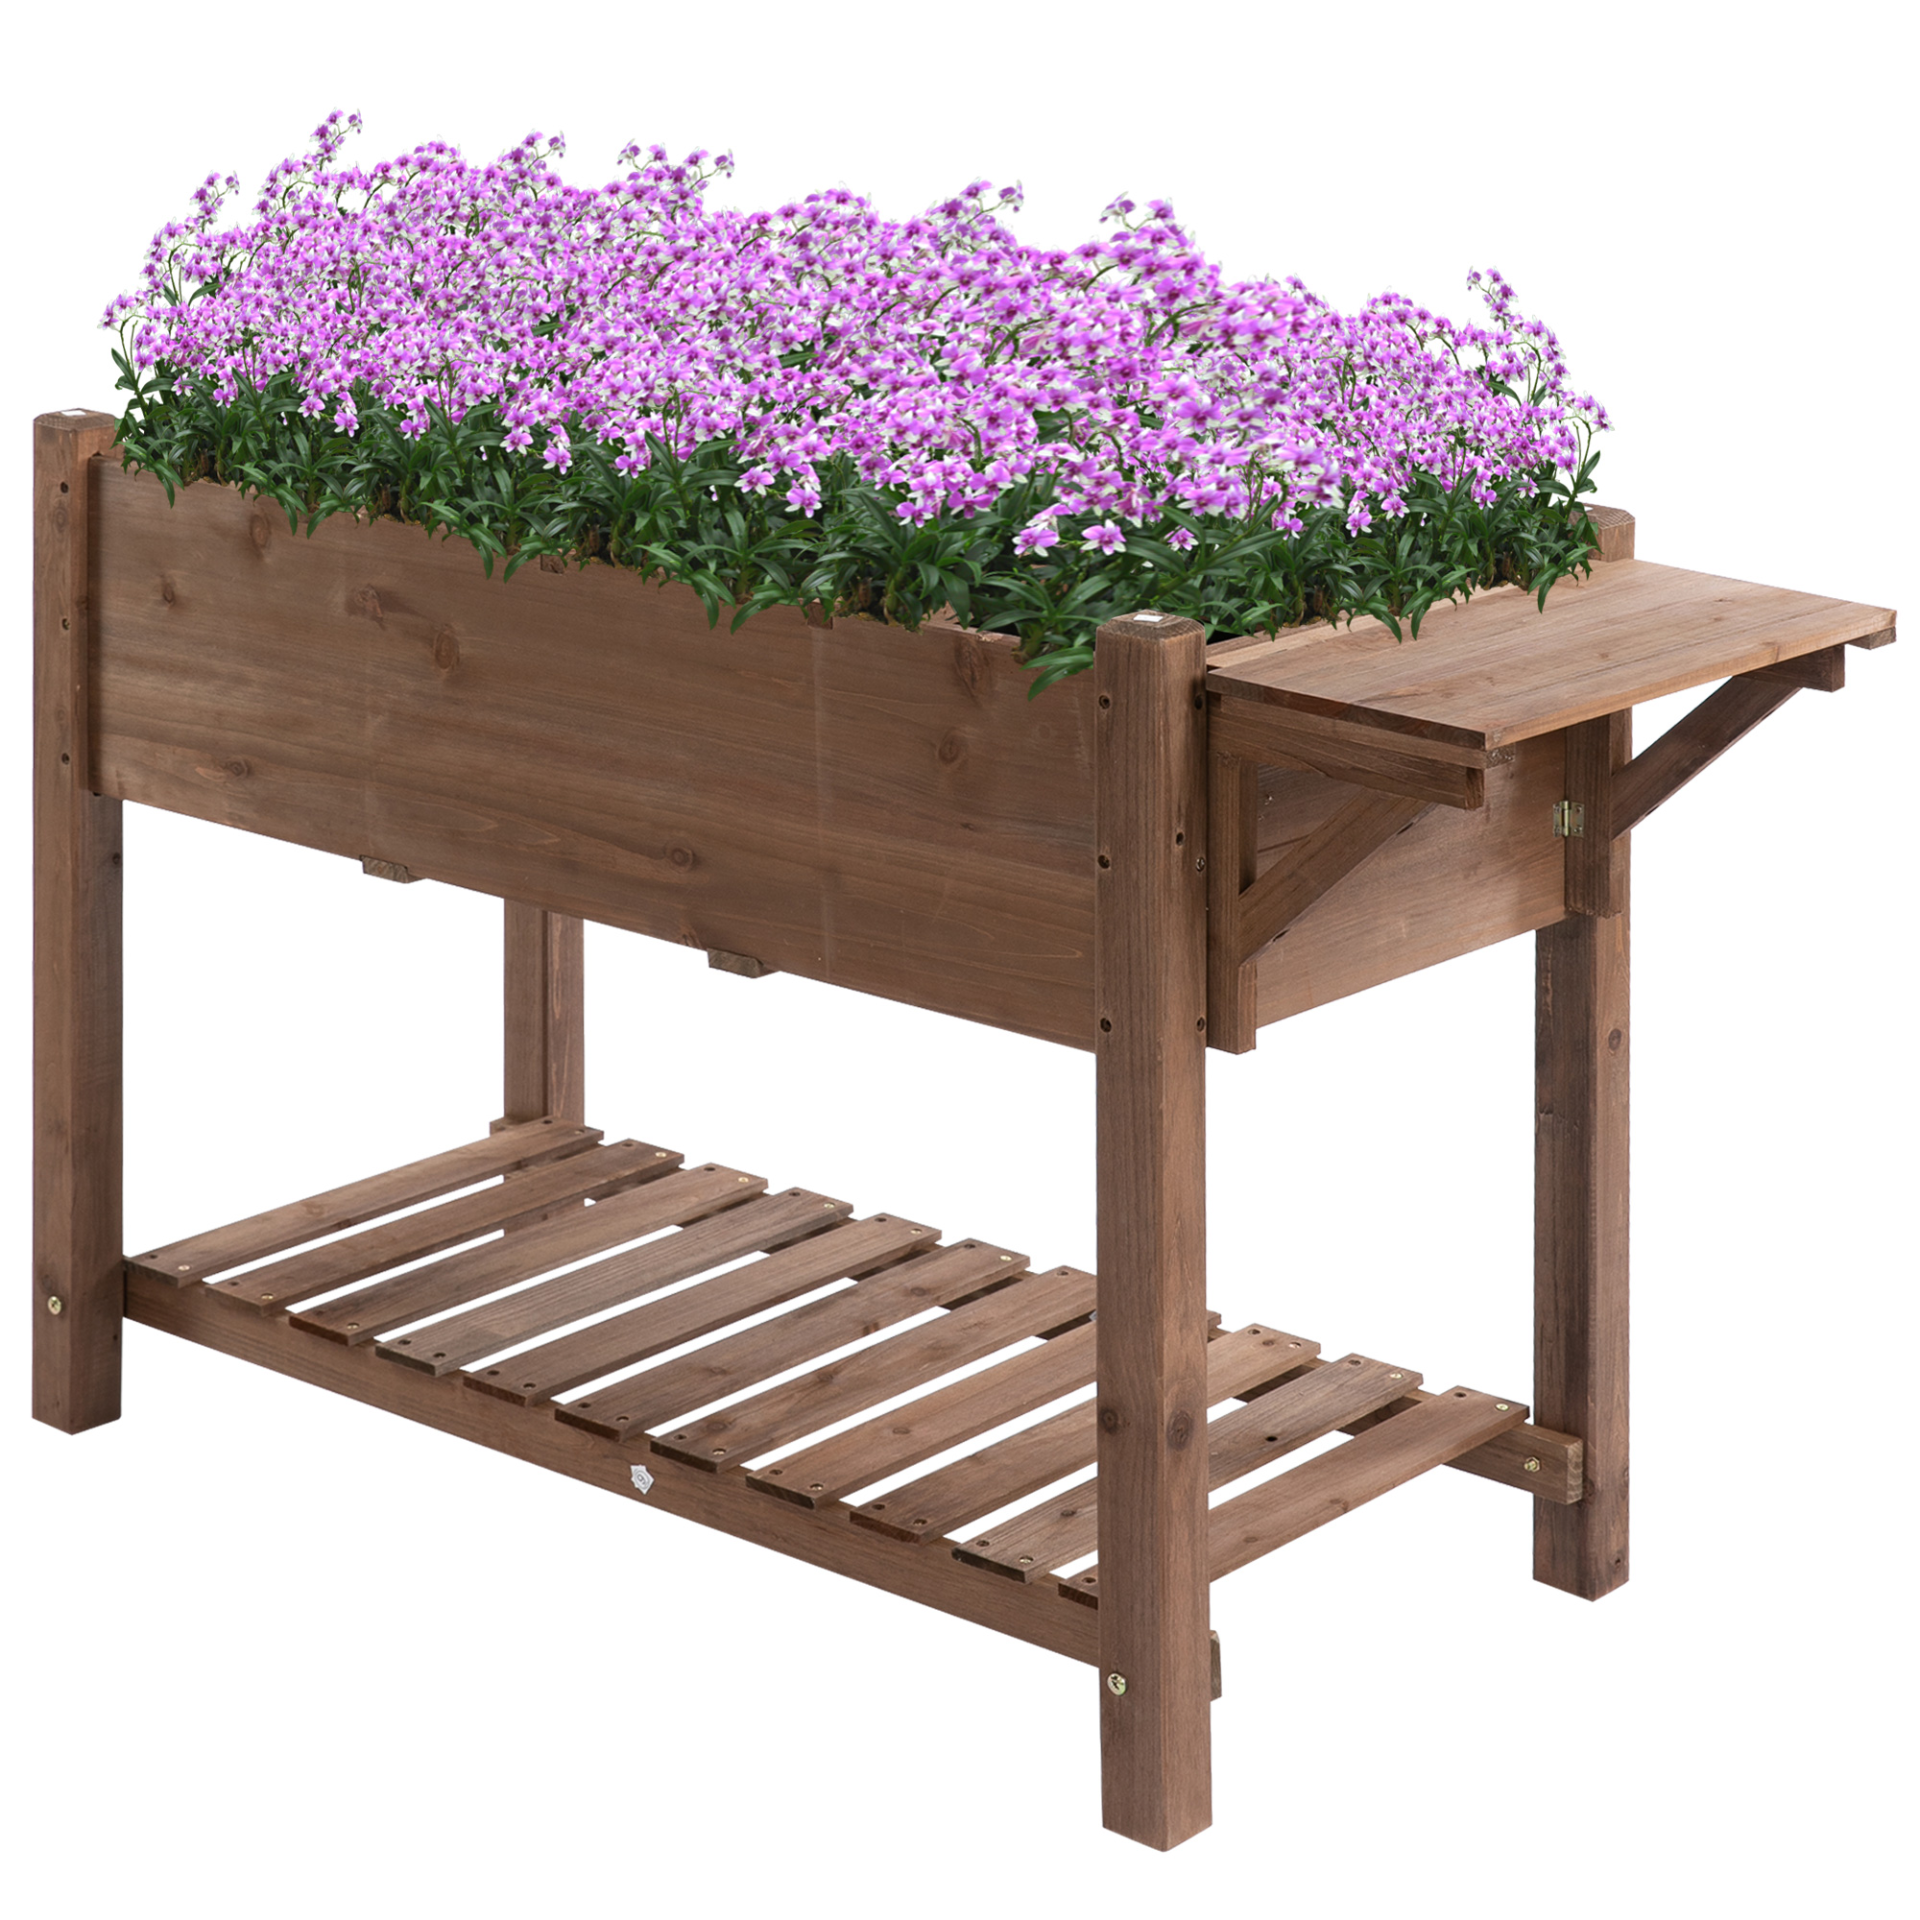 Outsunny Wooden Raised Garden Plant Stand Outdoor Tall Flower Bed Box with Botto